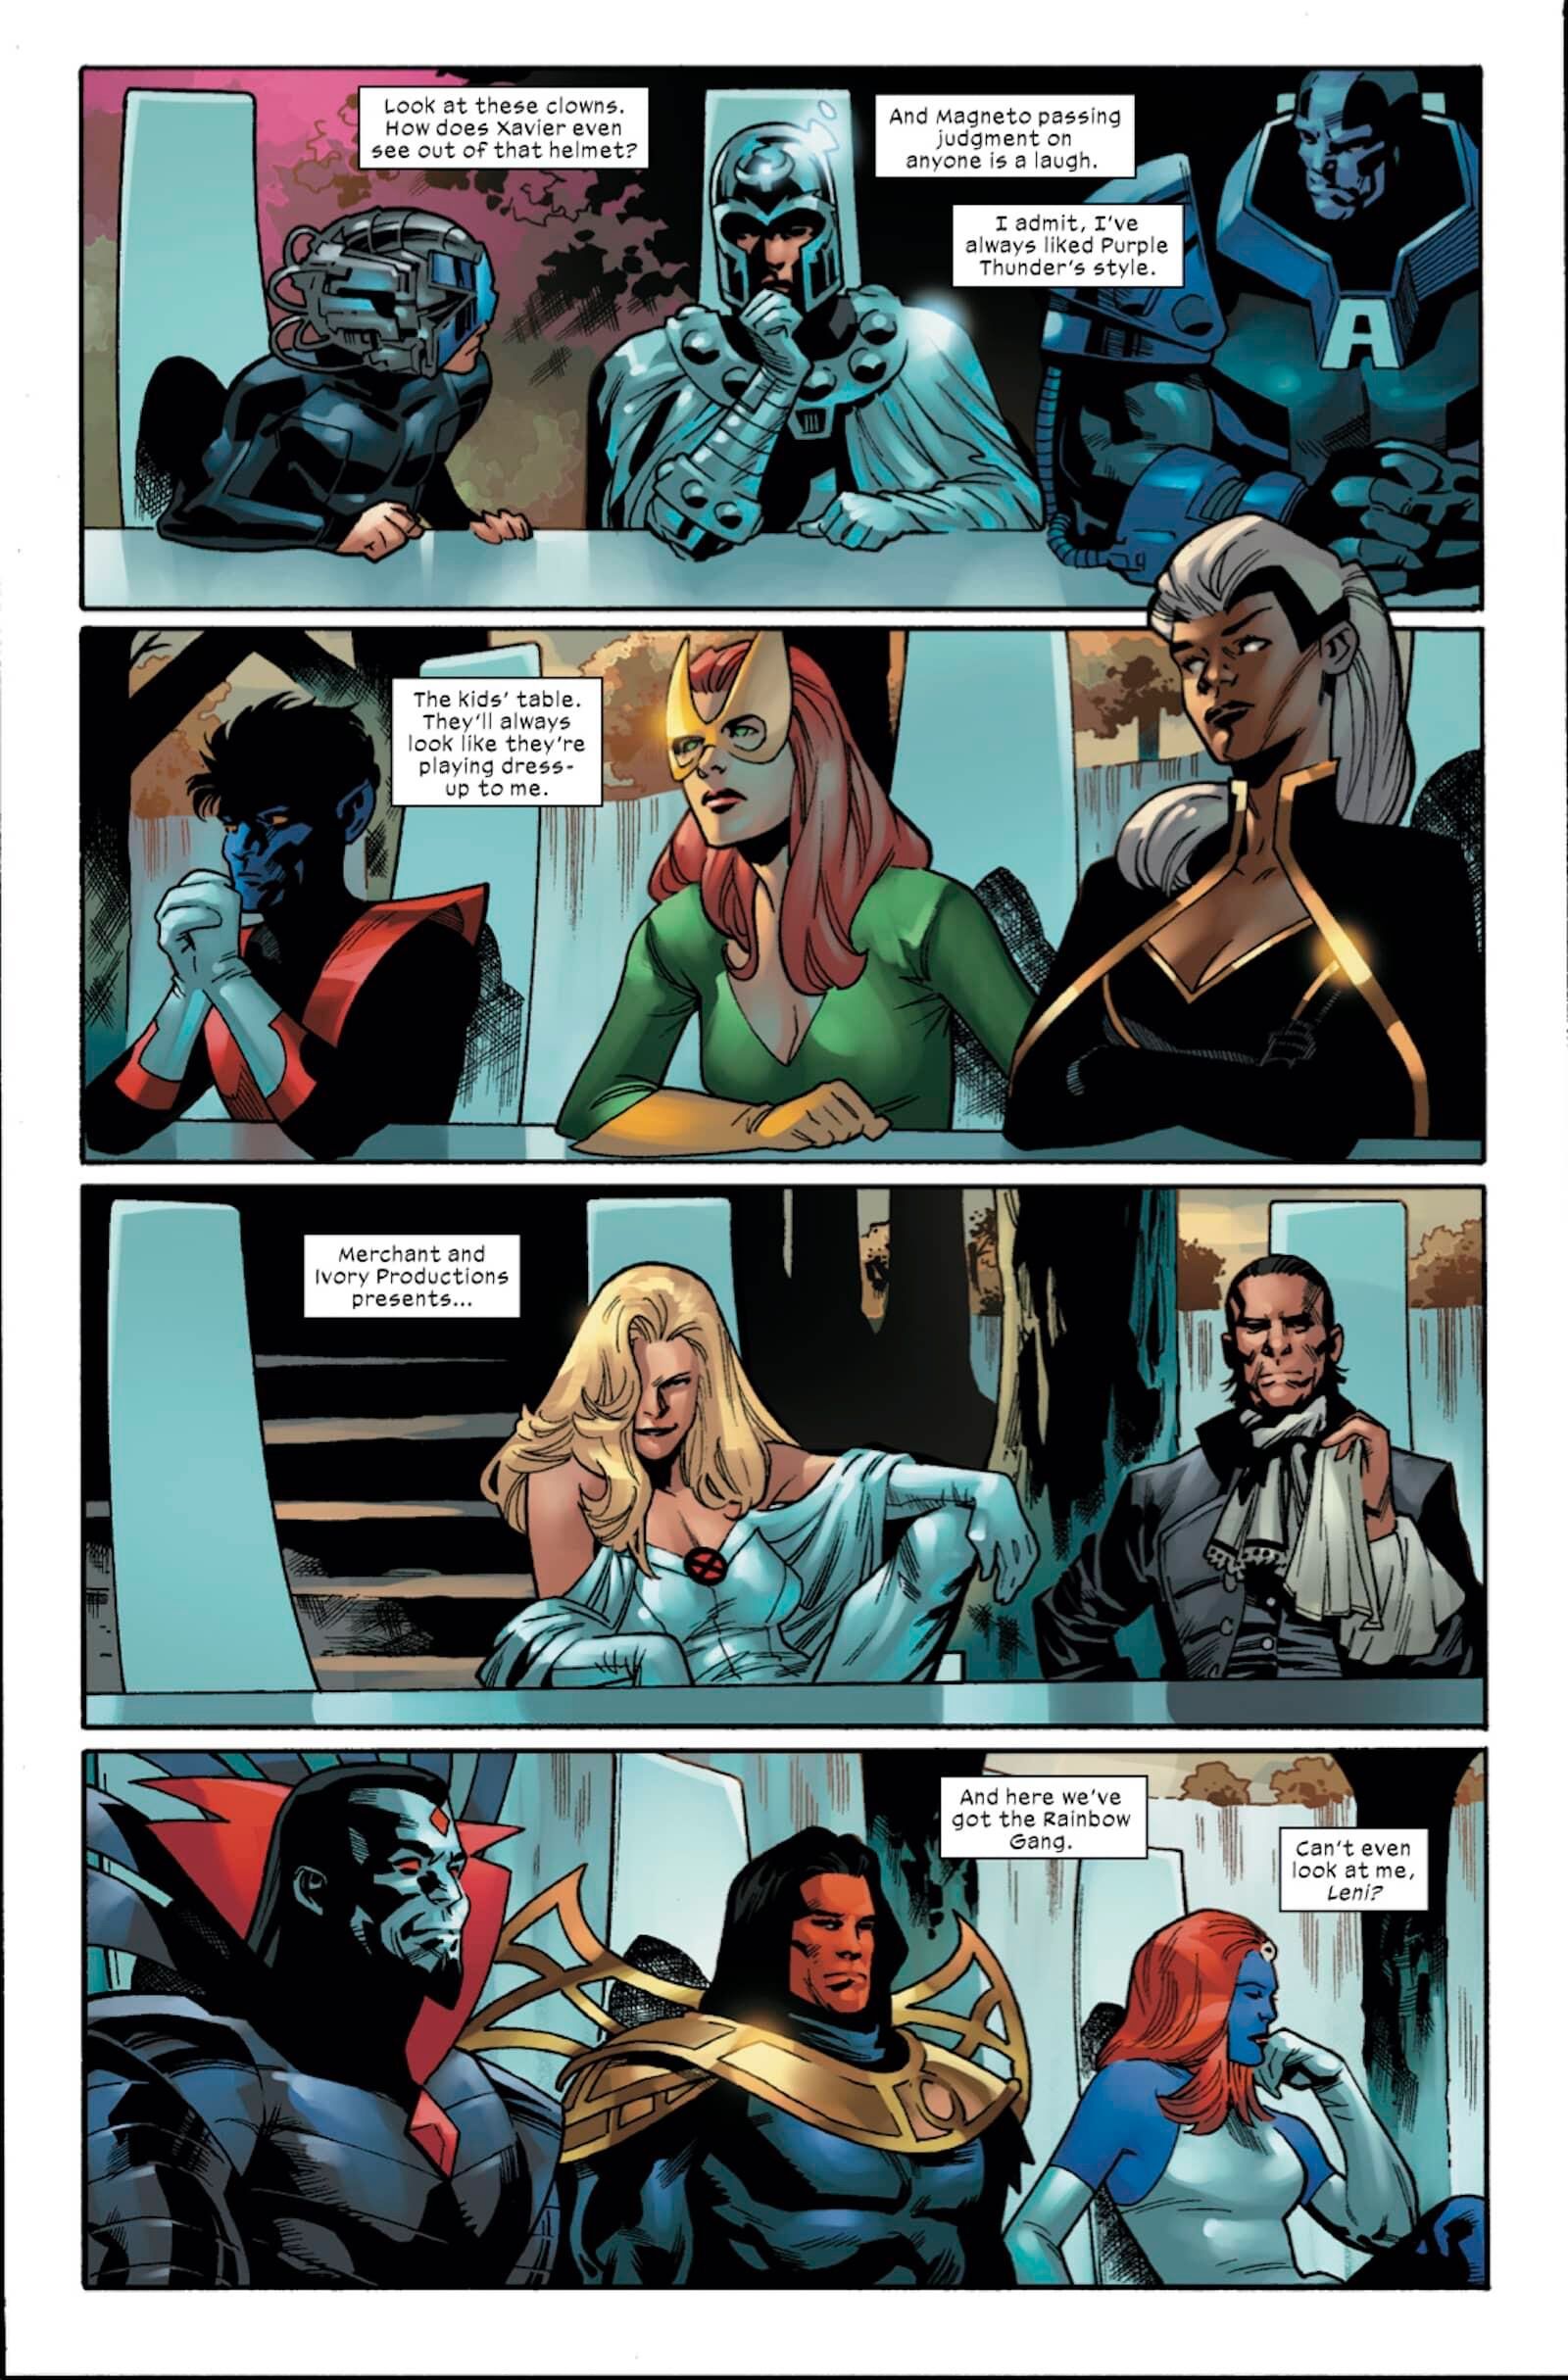 Sabretooth 1 preview page 2